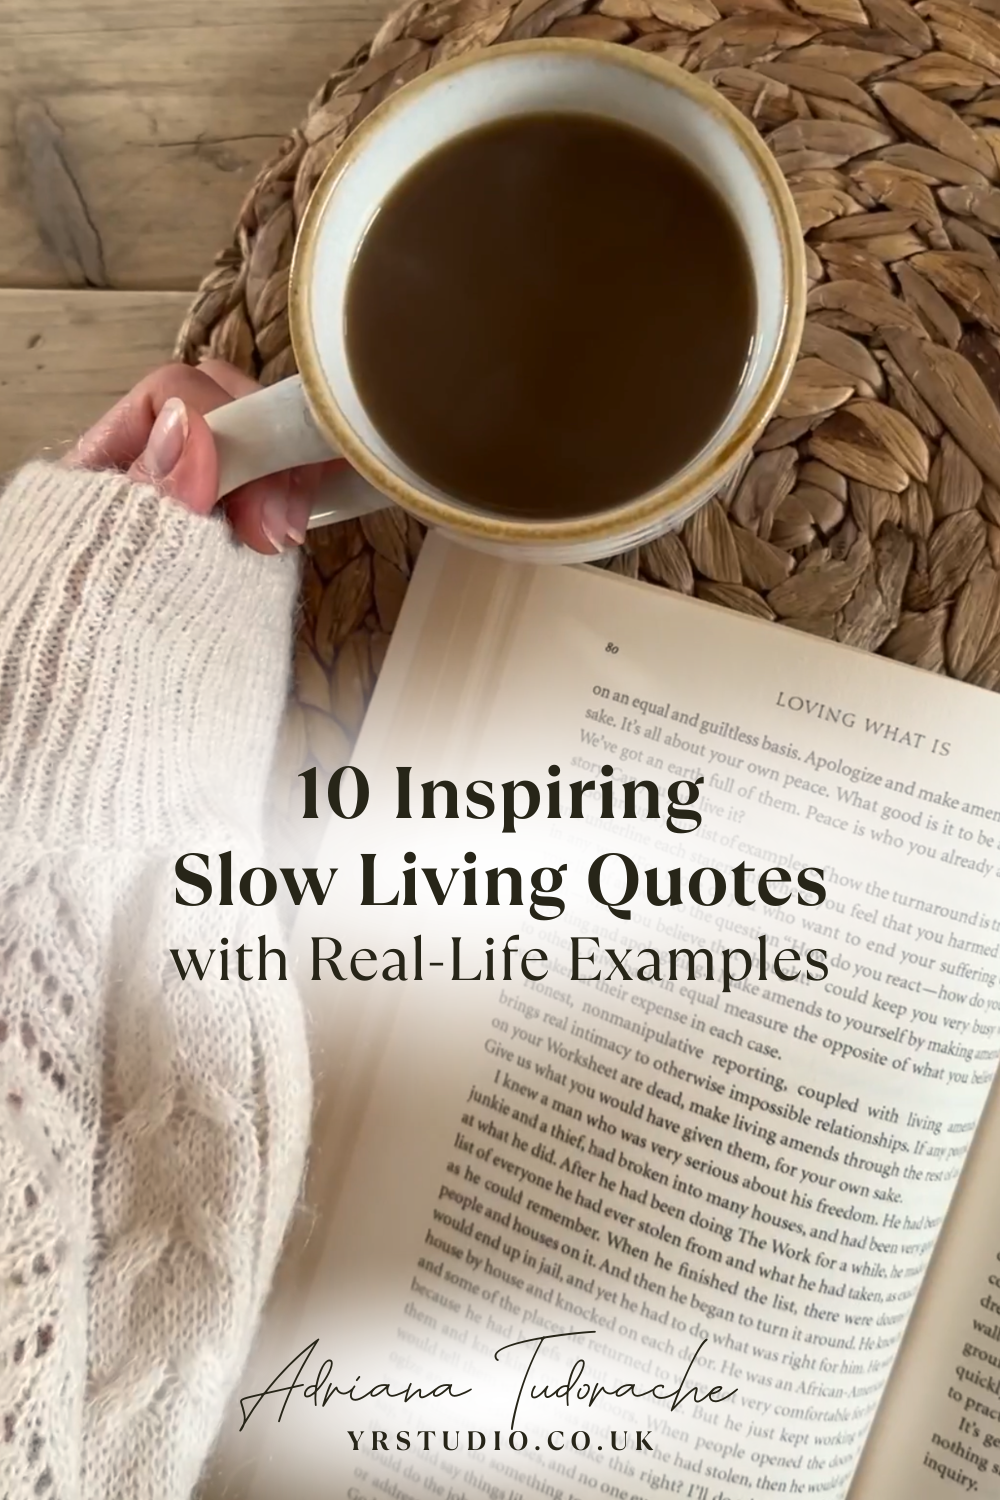 10 inspiring slow living quotes and real-life examples